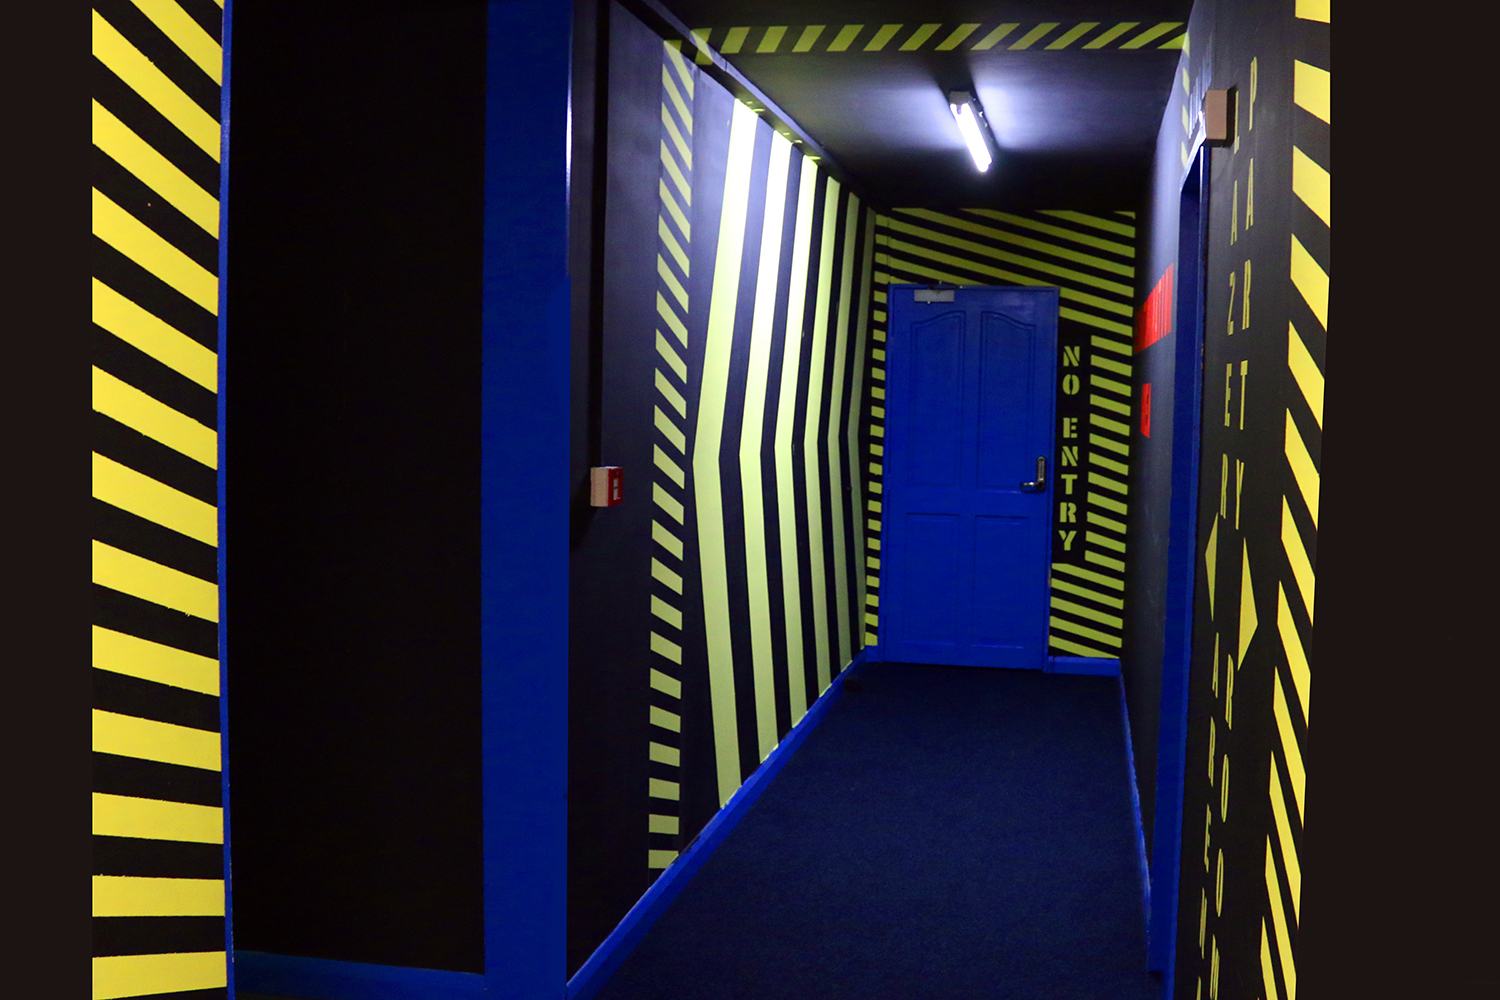 Book your Lazer Zone session at Selby Superbowl! - 2 games of action!1500 x 1000